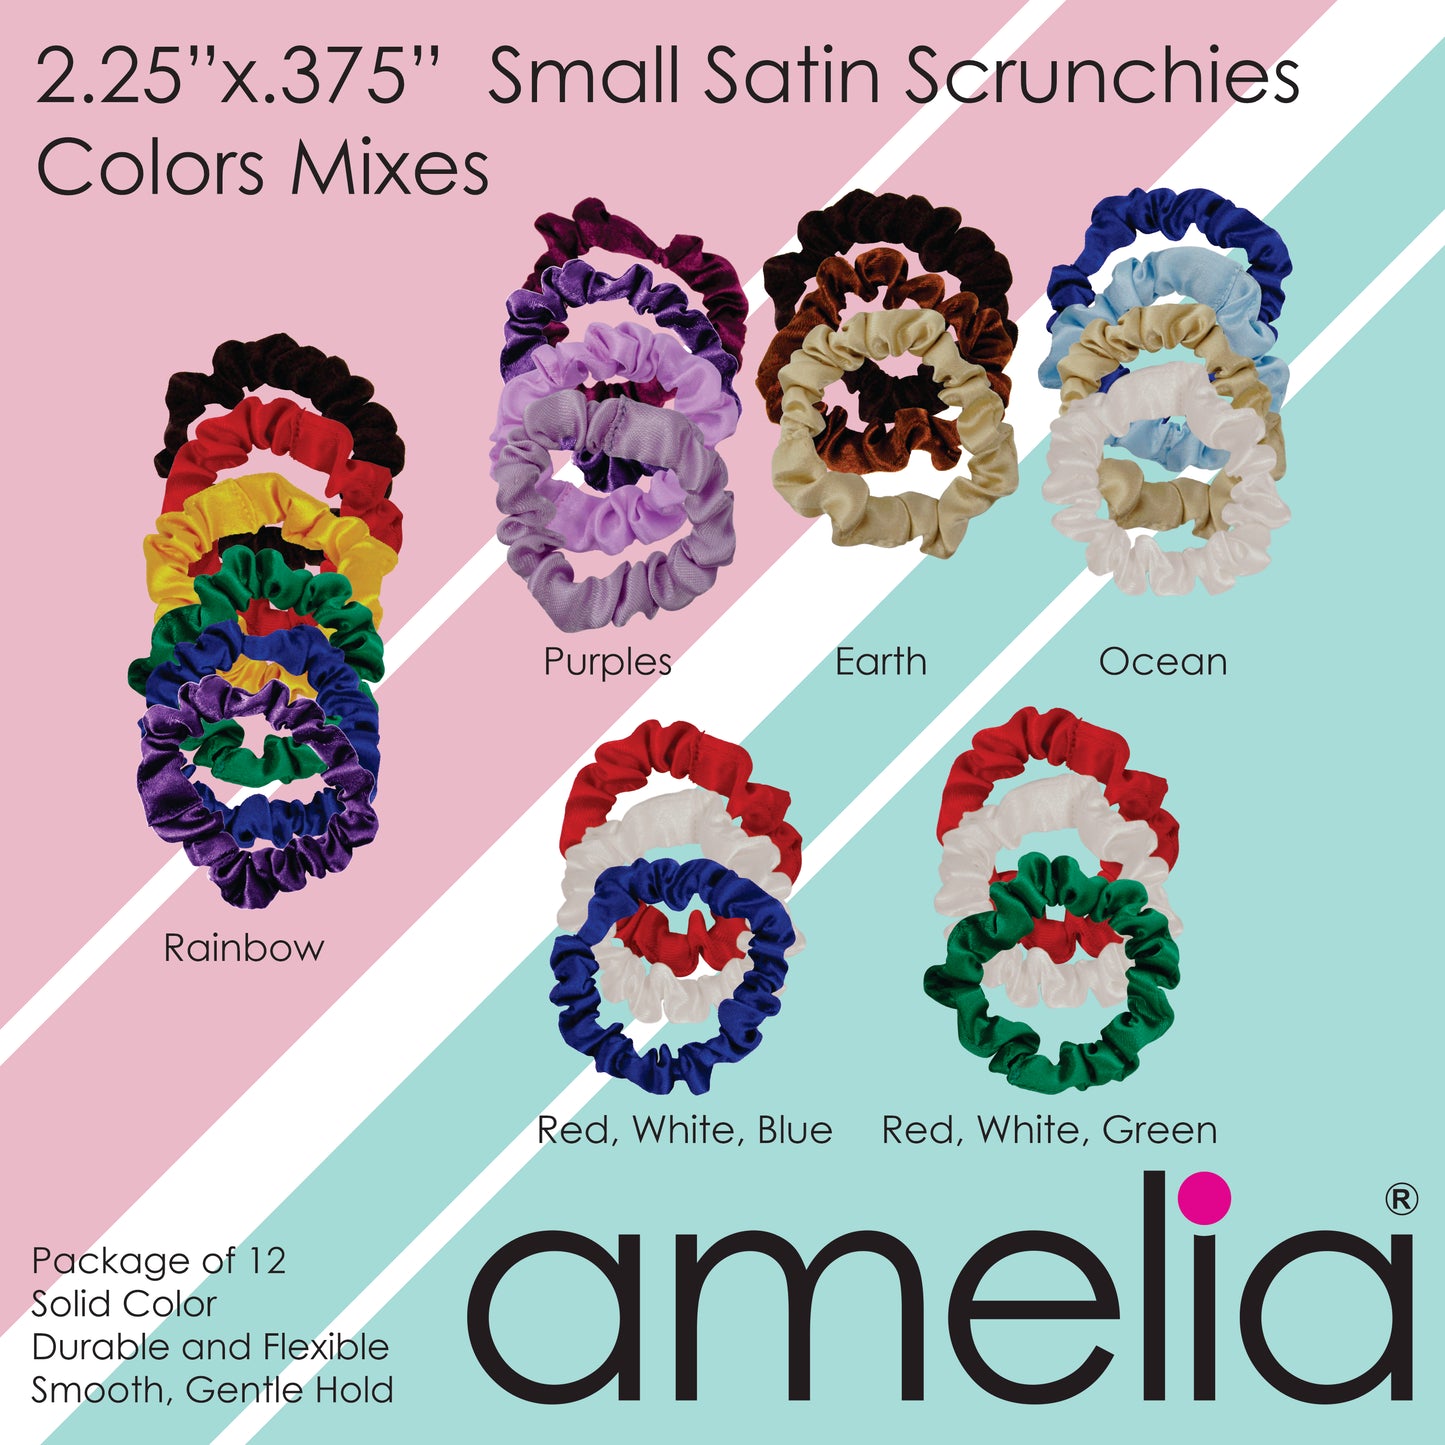 Amelia Beauty, Black Satin Scrunchies, 2.25in Diameter, Gentle on Hair, Strong Hold, No Snag, No Dents or Creases. 12 Pack